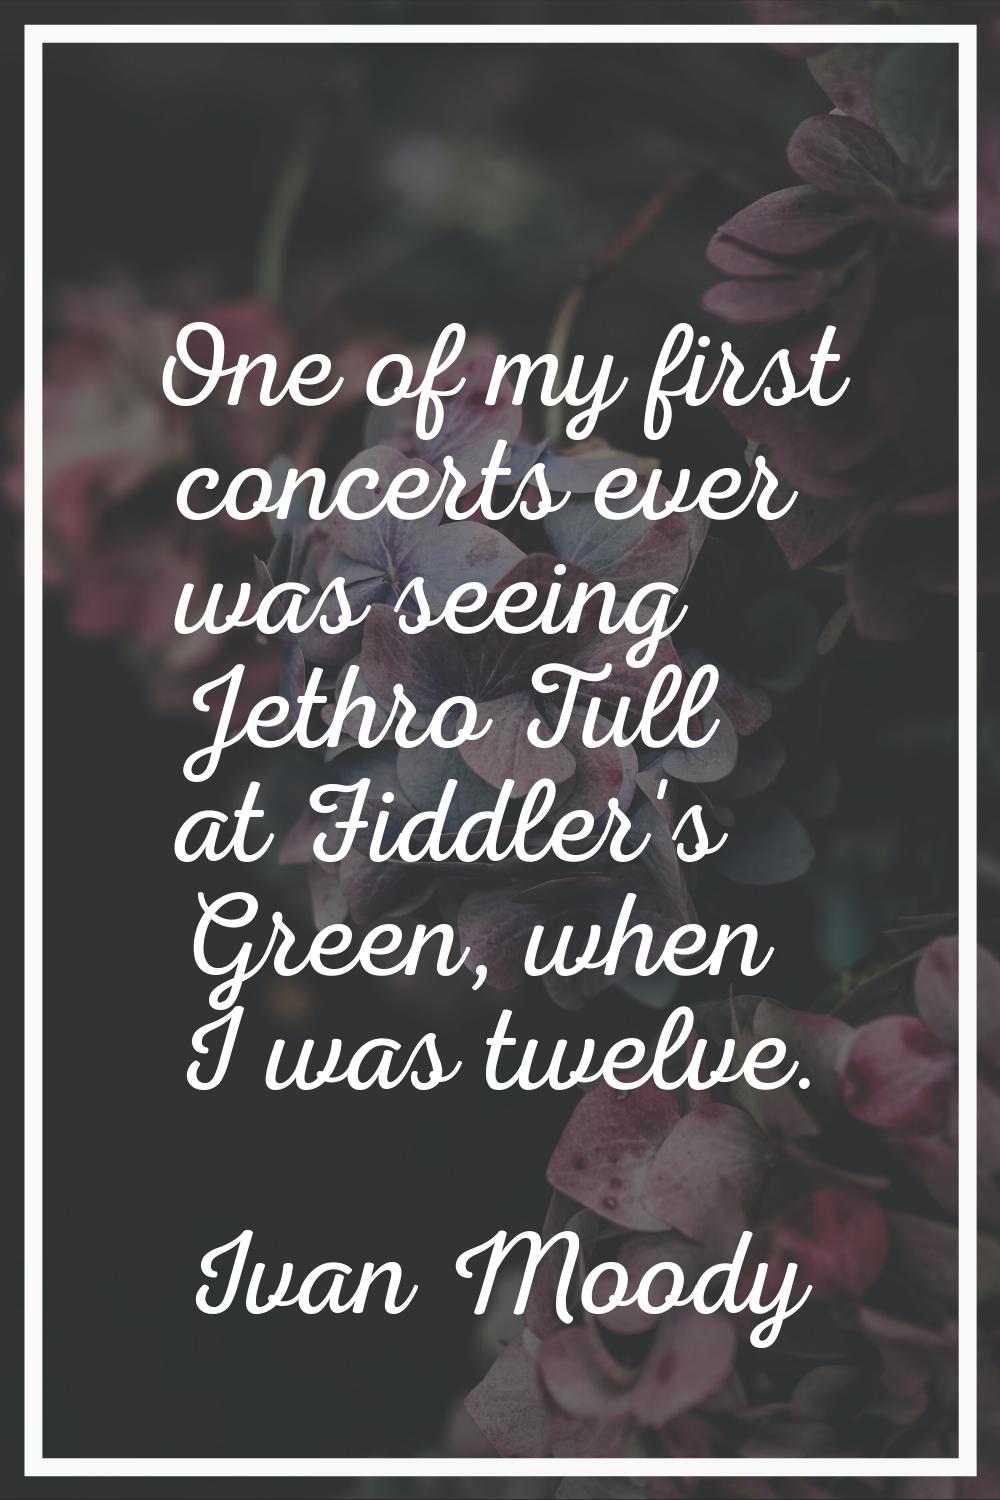 One of my first concerts ever was seeing Jethro Tull at Fiddler's Green, when I was twelve.